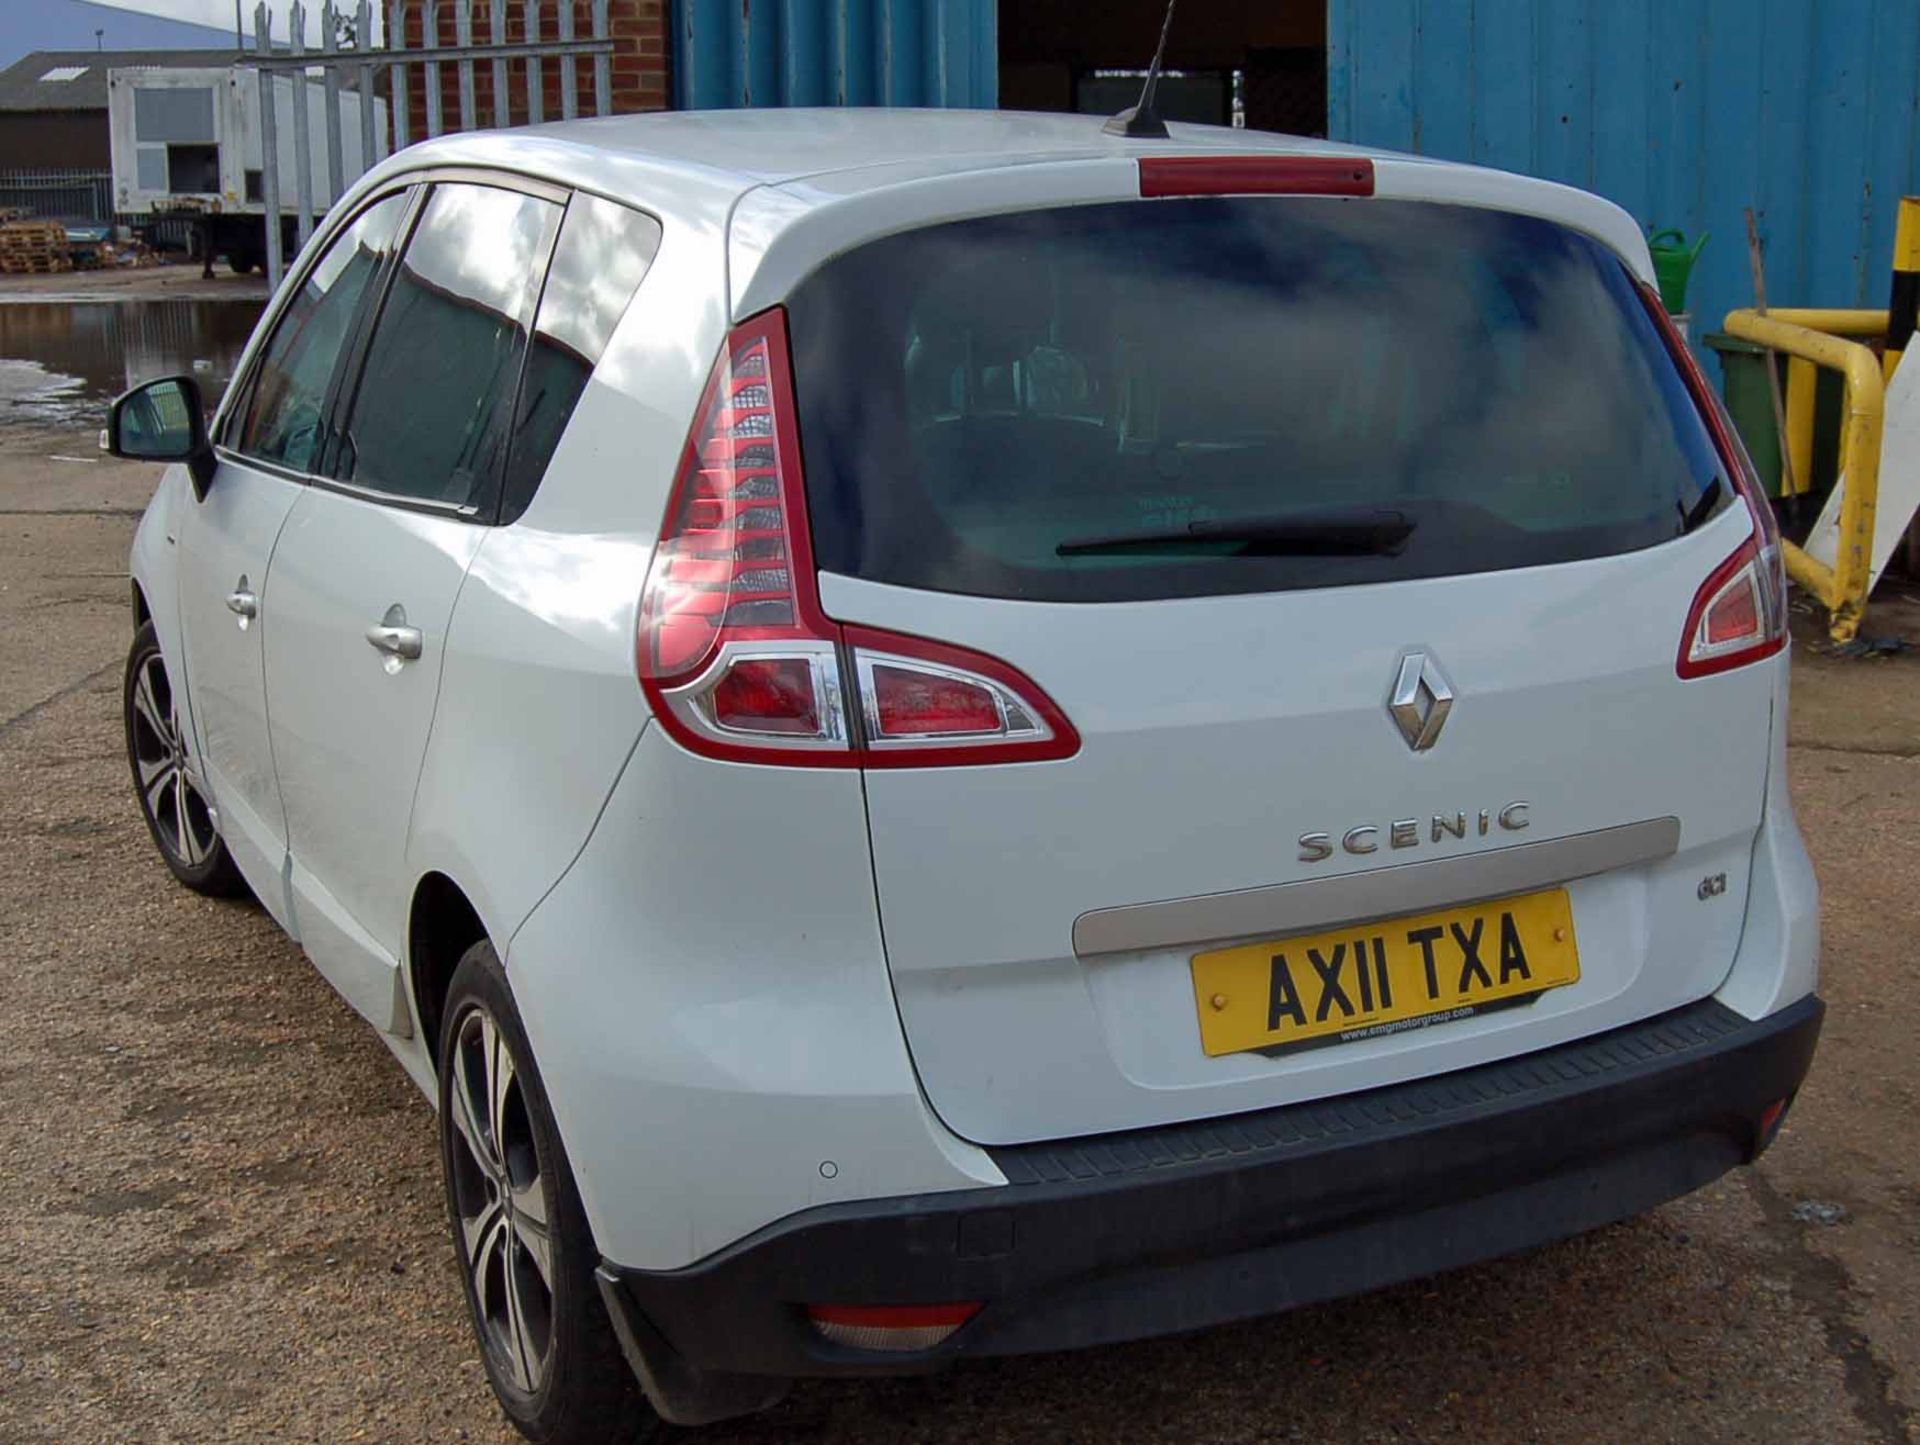 A RENAULT Scenic 1.5 Dynamiq TT dciSA 5-Door, Automatic, Diesel, Hatchback MPV, Registration No. - Image 3 of 6